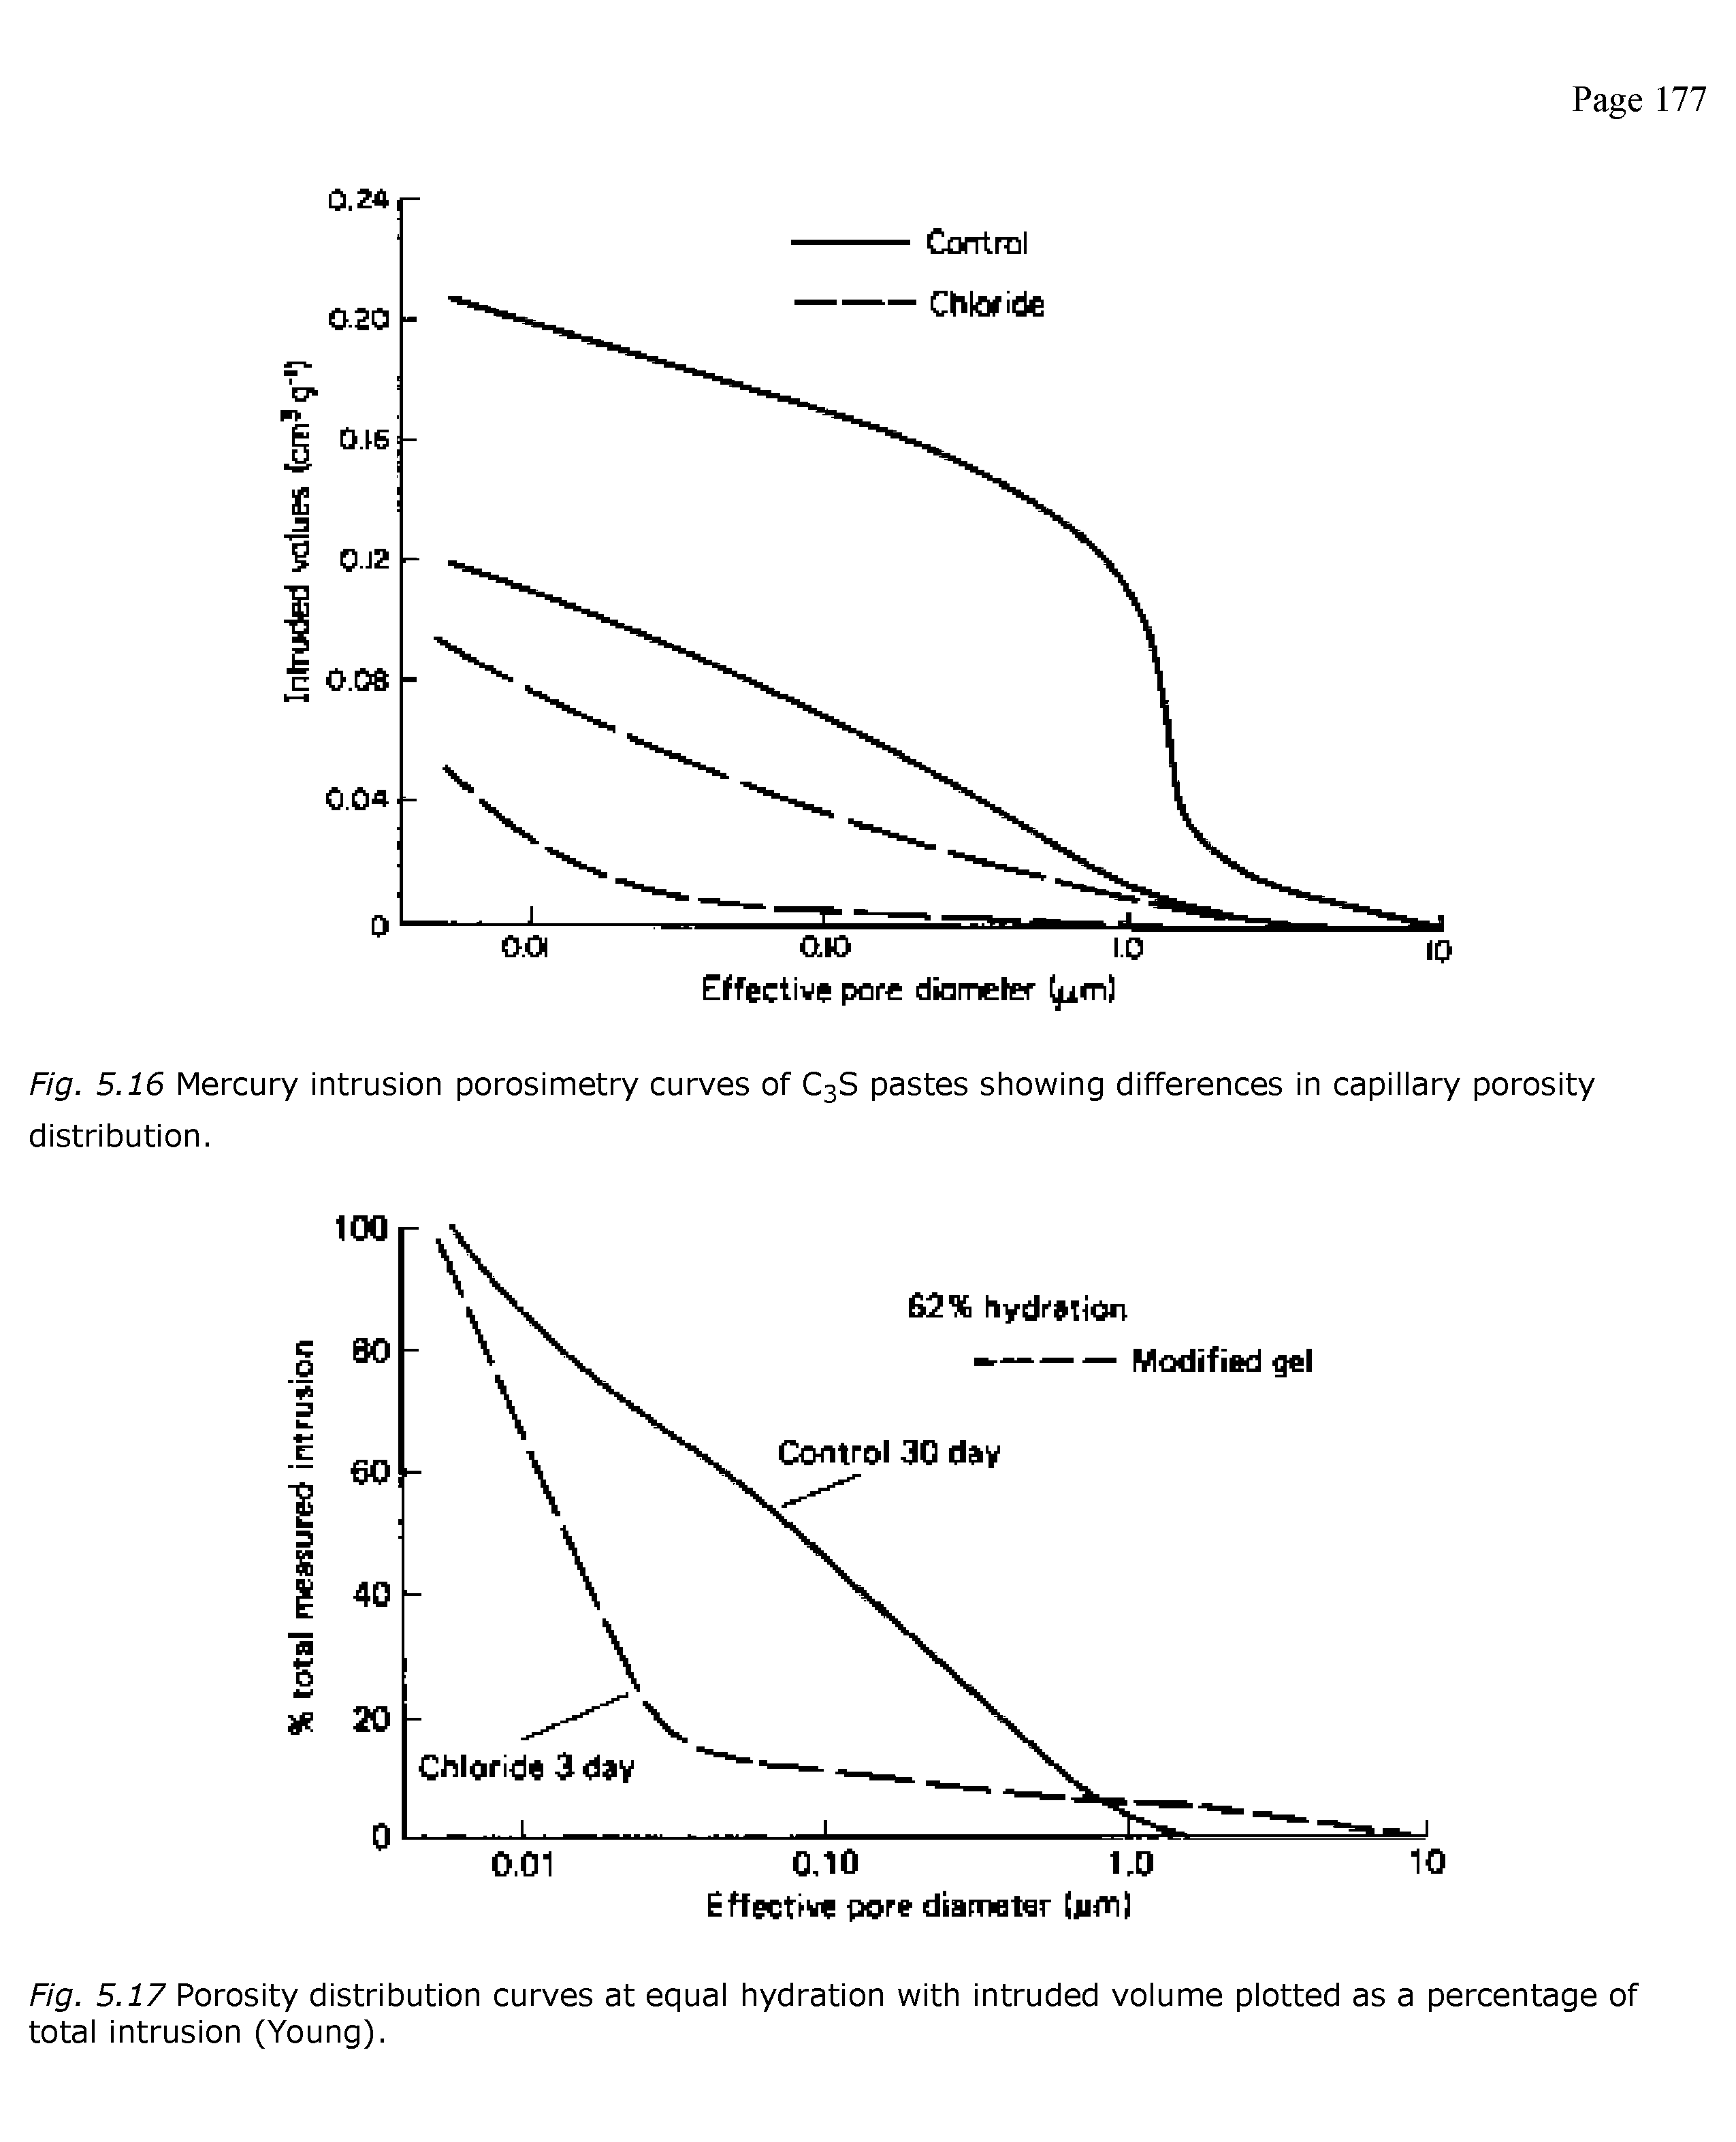 Fig. 5.16 Mercury intrusion porosimetry curves of C3S pastes showing differences in capillary porosity distribution.